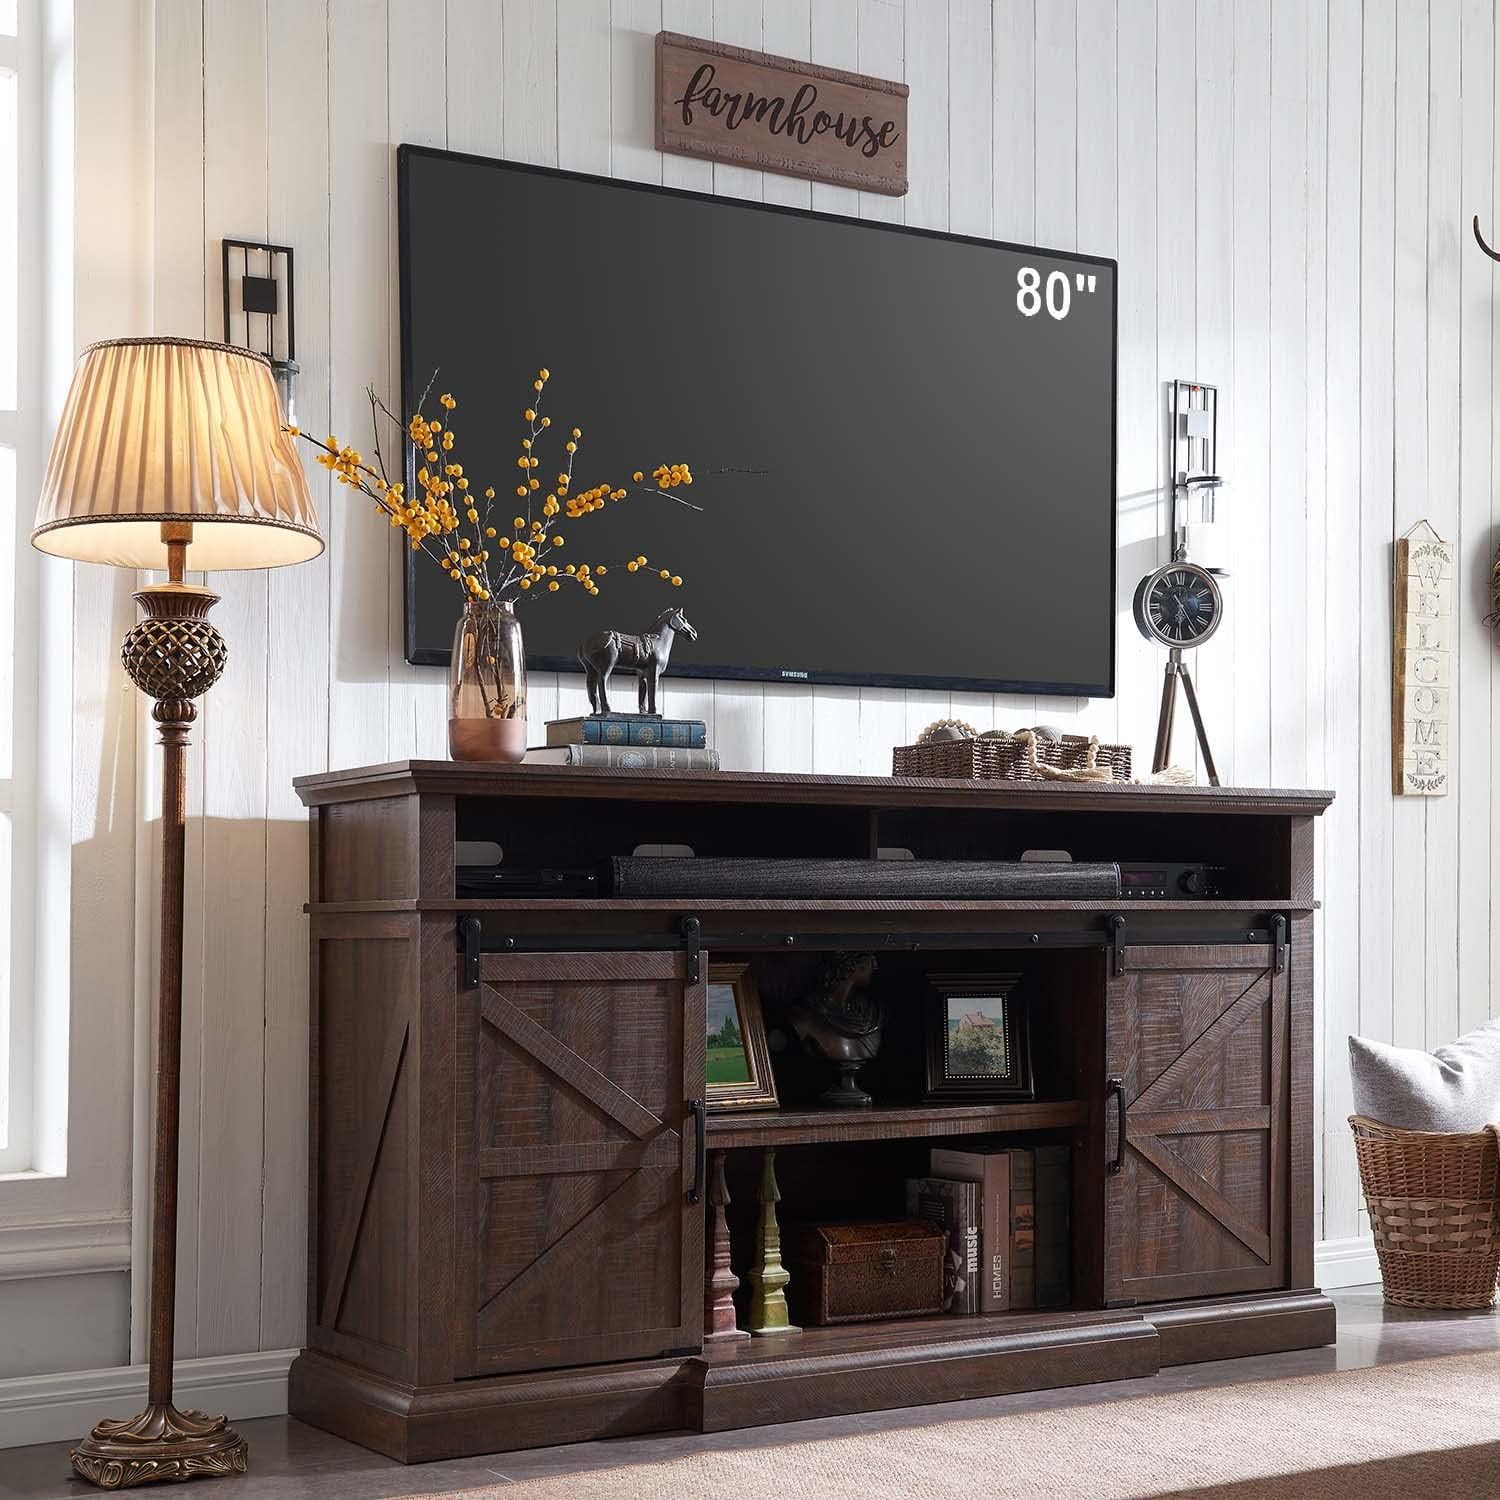 Sincido Farmhouse Tv Stand For 80 Inch Tvs, 39" Tall Entertainment Center  W/double Sliding Barn Door, Large Media Console Cabinet W/soundbar &  Adjustable Shelves For Living Room, 70inch, Brown – Walmart With Regard To Farmhouse Tv Stands For 70 Inch Tv (View 2 of 15)